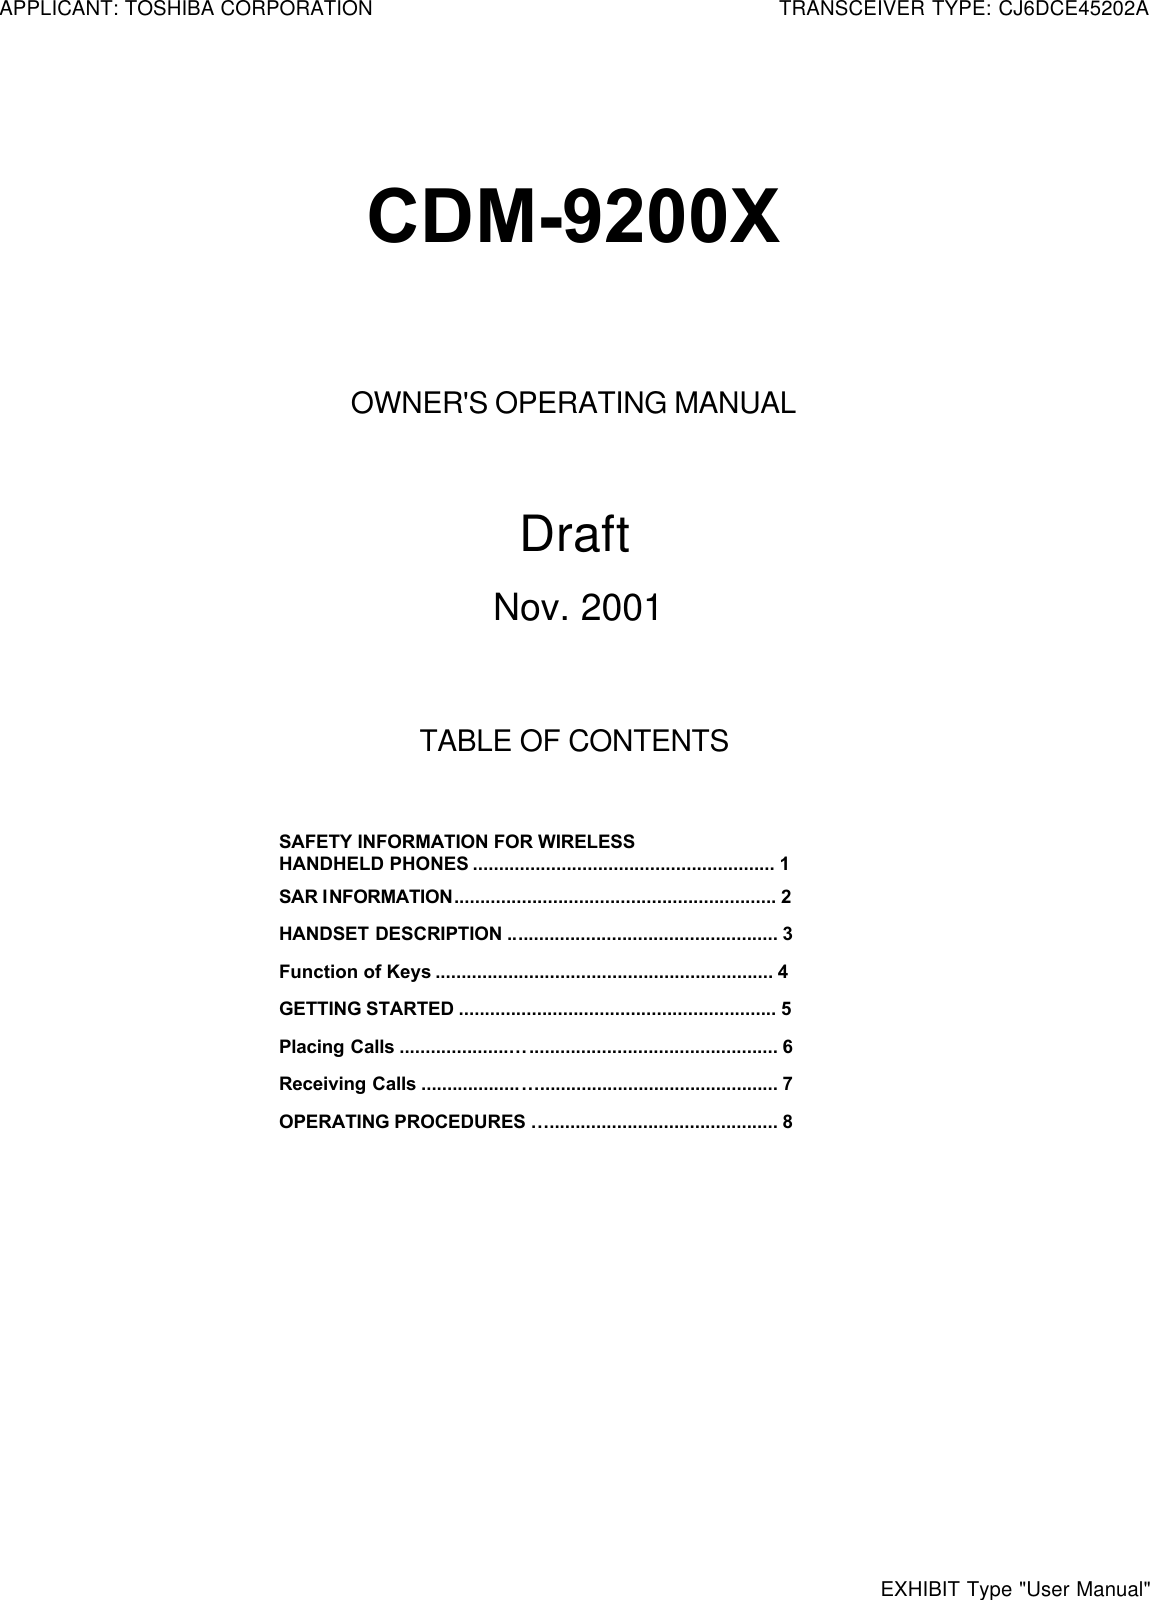 CDM-9200XOWNER&apos;S OPERATING MANUALDraftNov. 2001TABLE OF CONTENTSSAFETY INFORMATION FOR WIRELESSHANDHELD PHONES .......................................................... 1SAR INFORMATION.............................................................. 2HANDSET DESCRIPTION .................................................... 3Function of Keys ................................................................. 4GETTING STARTED ............................................................. 5Placing Calls .....................…................................................ 6Receiving Calls ...................….............................................. 7OPERATING PROCEDURES …............................................ 8APPLICANT: TOSHIBA CORPORATIONTRANSCEIVER TYPE: CJ6DCE45202AEXHIBIT Type &quot;User Manual&quot;